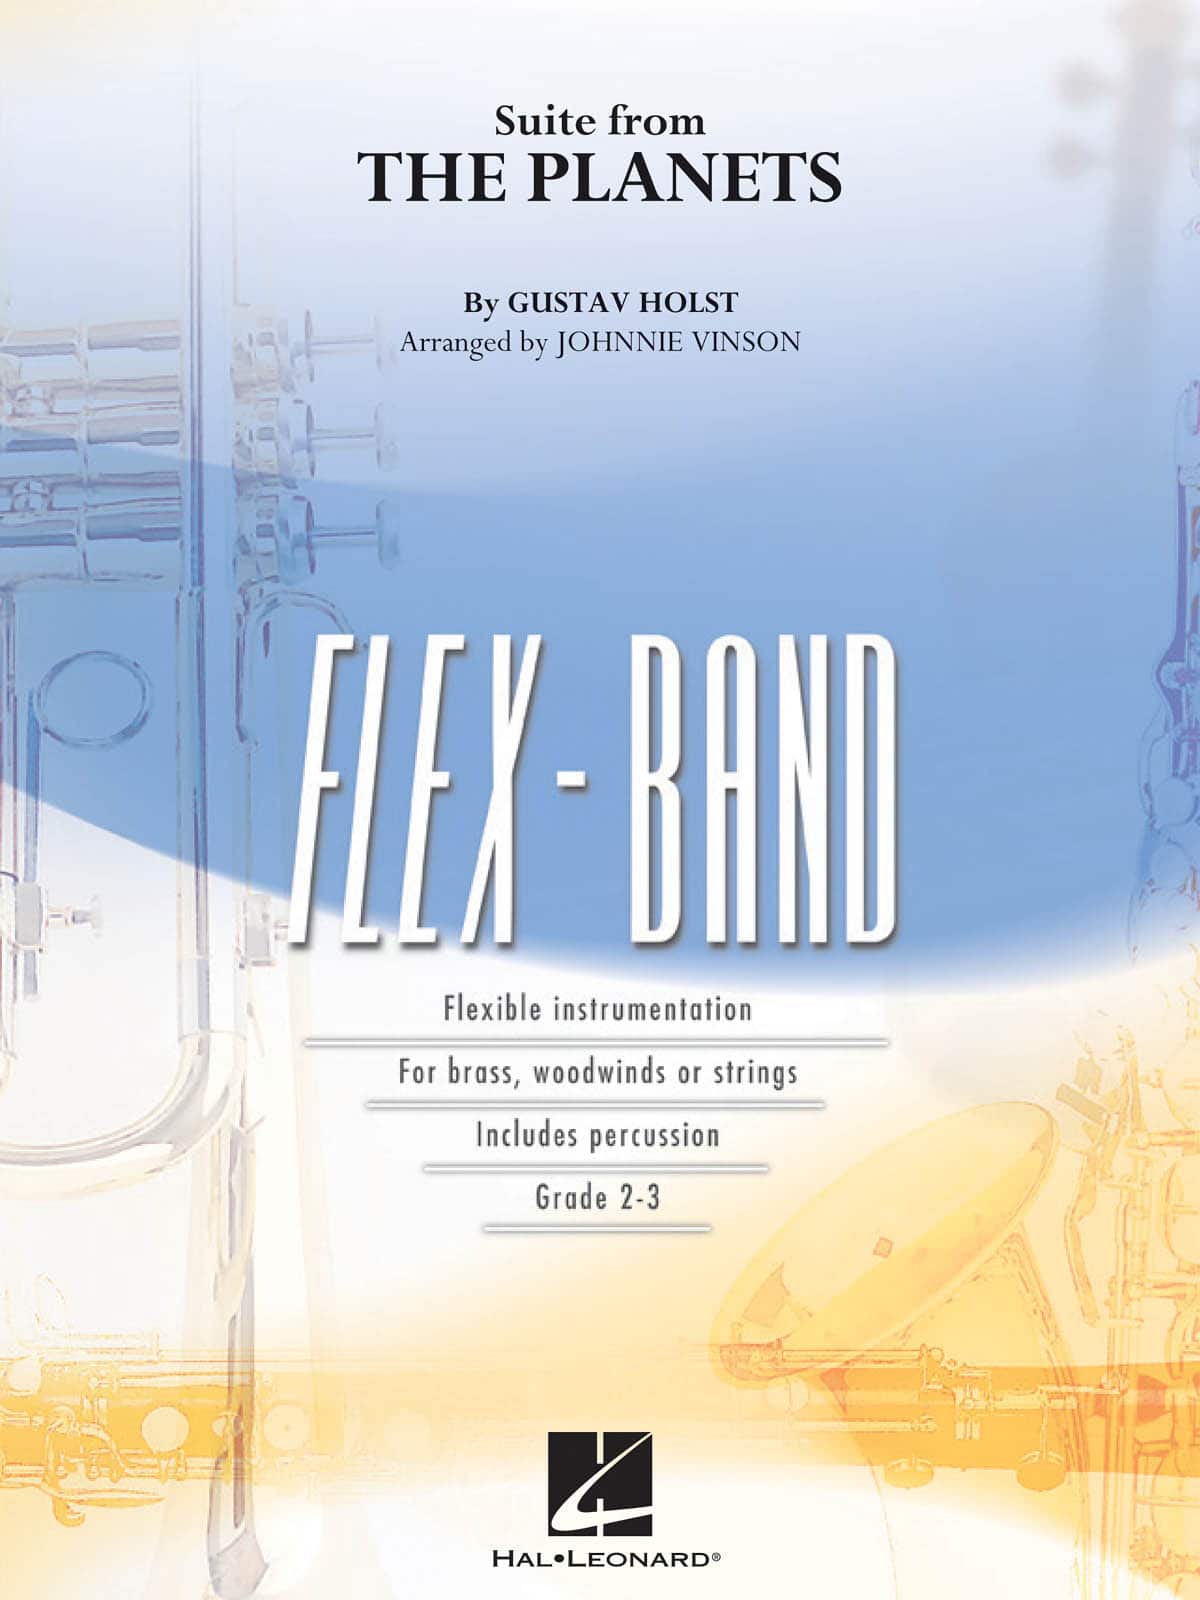 HAL LEONARD HOLST G. - SUITE FROM THE PLANETS - FLEX-BAND SERIES